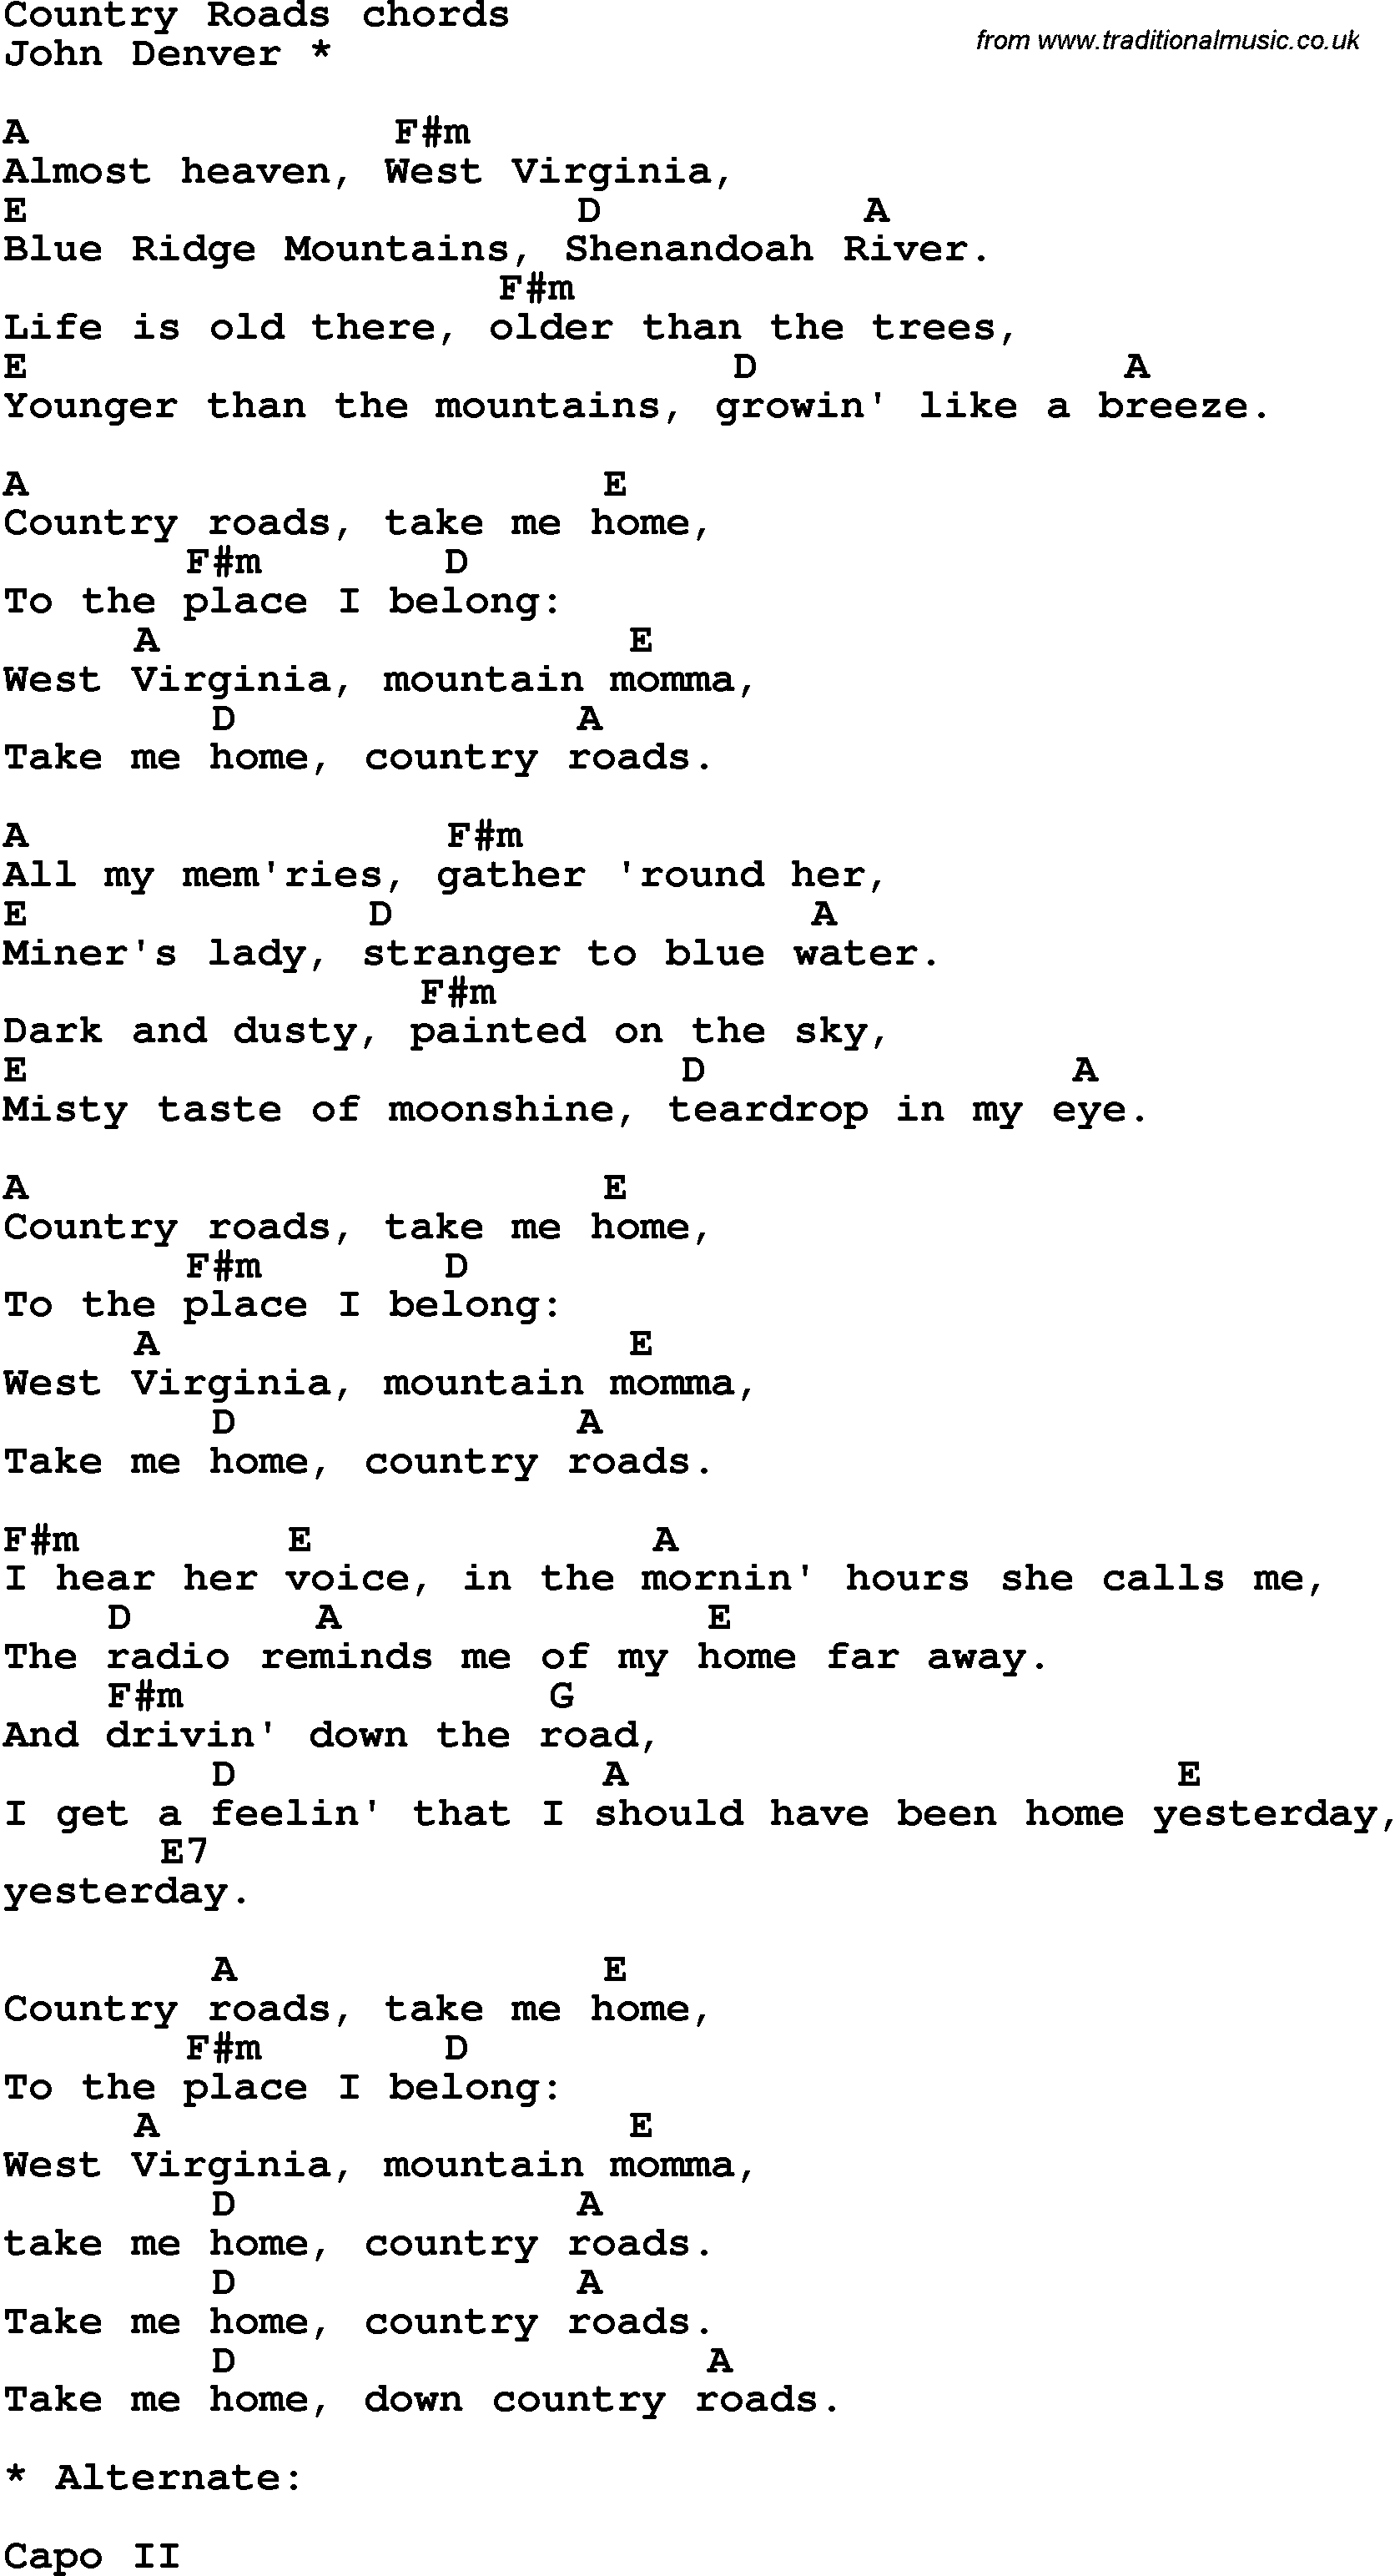 Country Roads Chords Song Lyrics With Guitar Chords For Country Roads